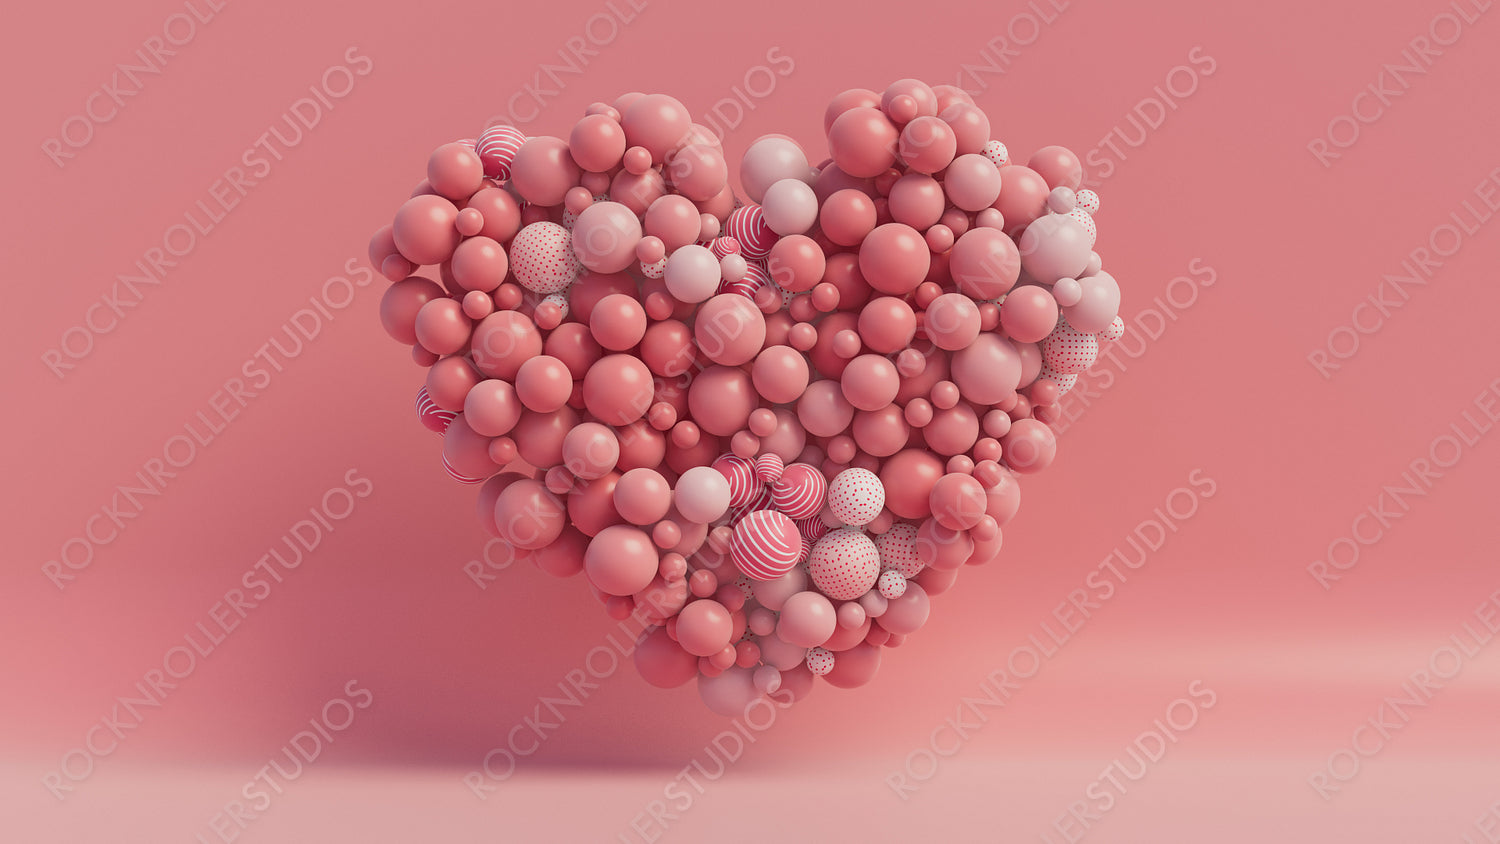 Multicolored Balloon Love Heart. Pink, Polka Dot and Striped Balloons arranged in a heart shape. 3D Render.